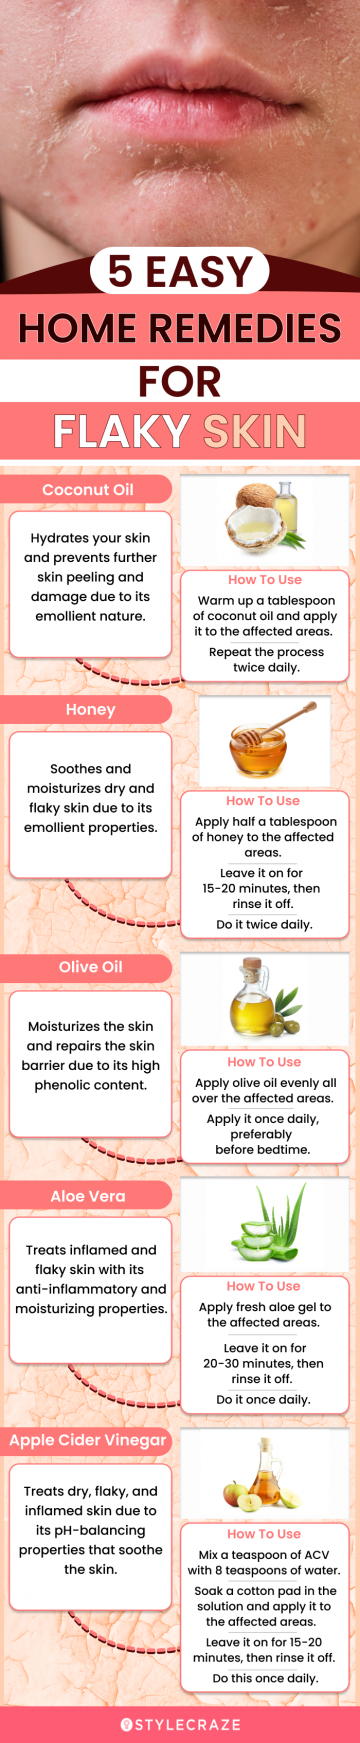 5 home remedies for flaky skin (infographic)